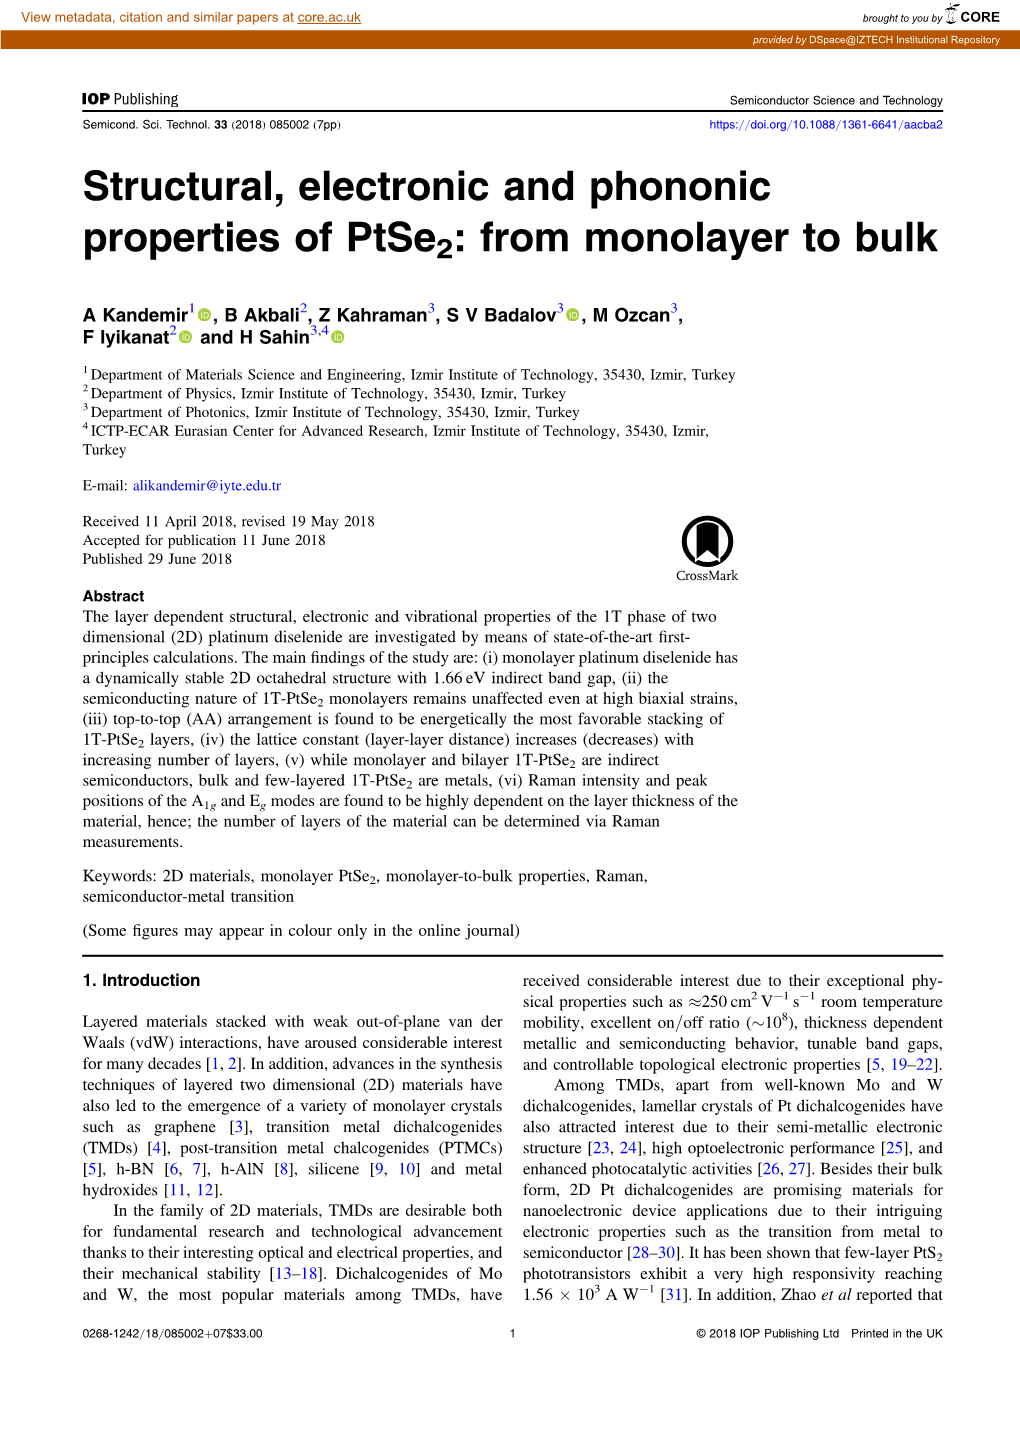 From Monolayer to Bulk